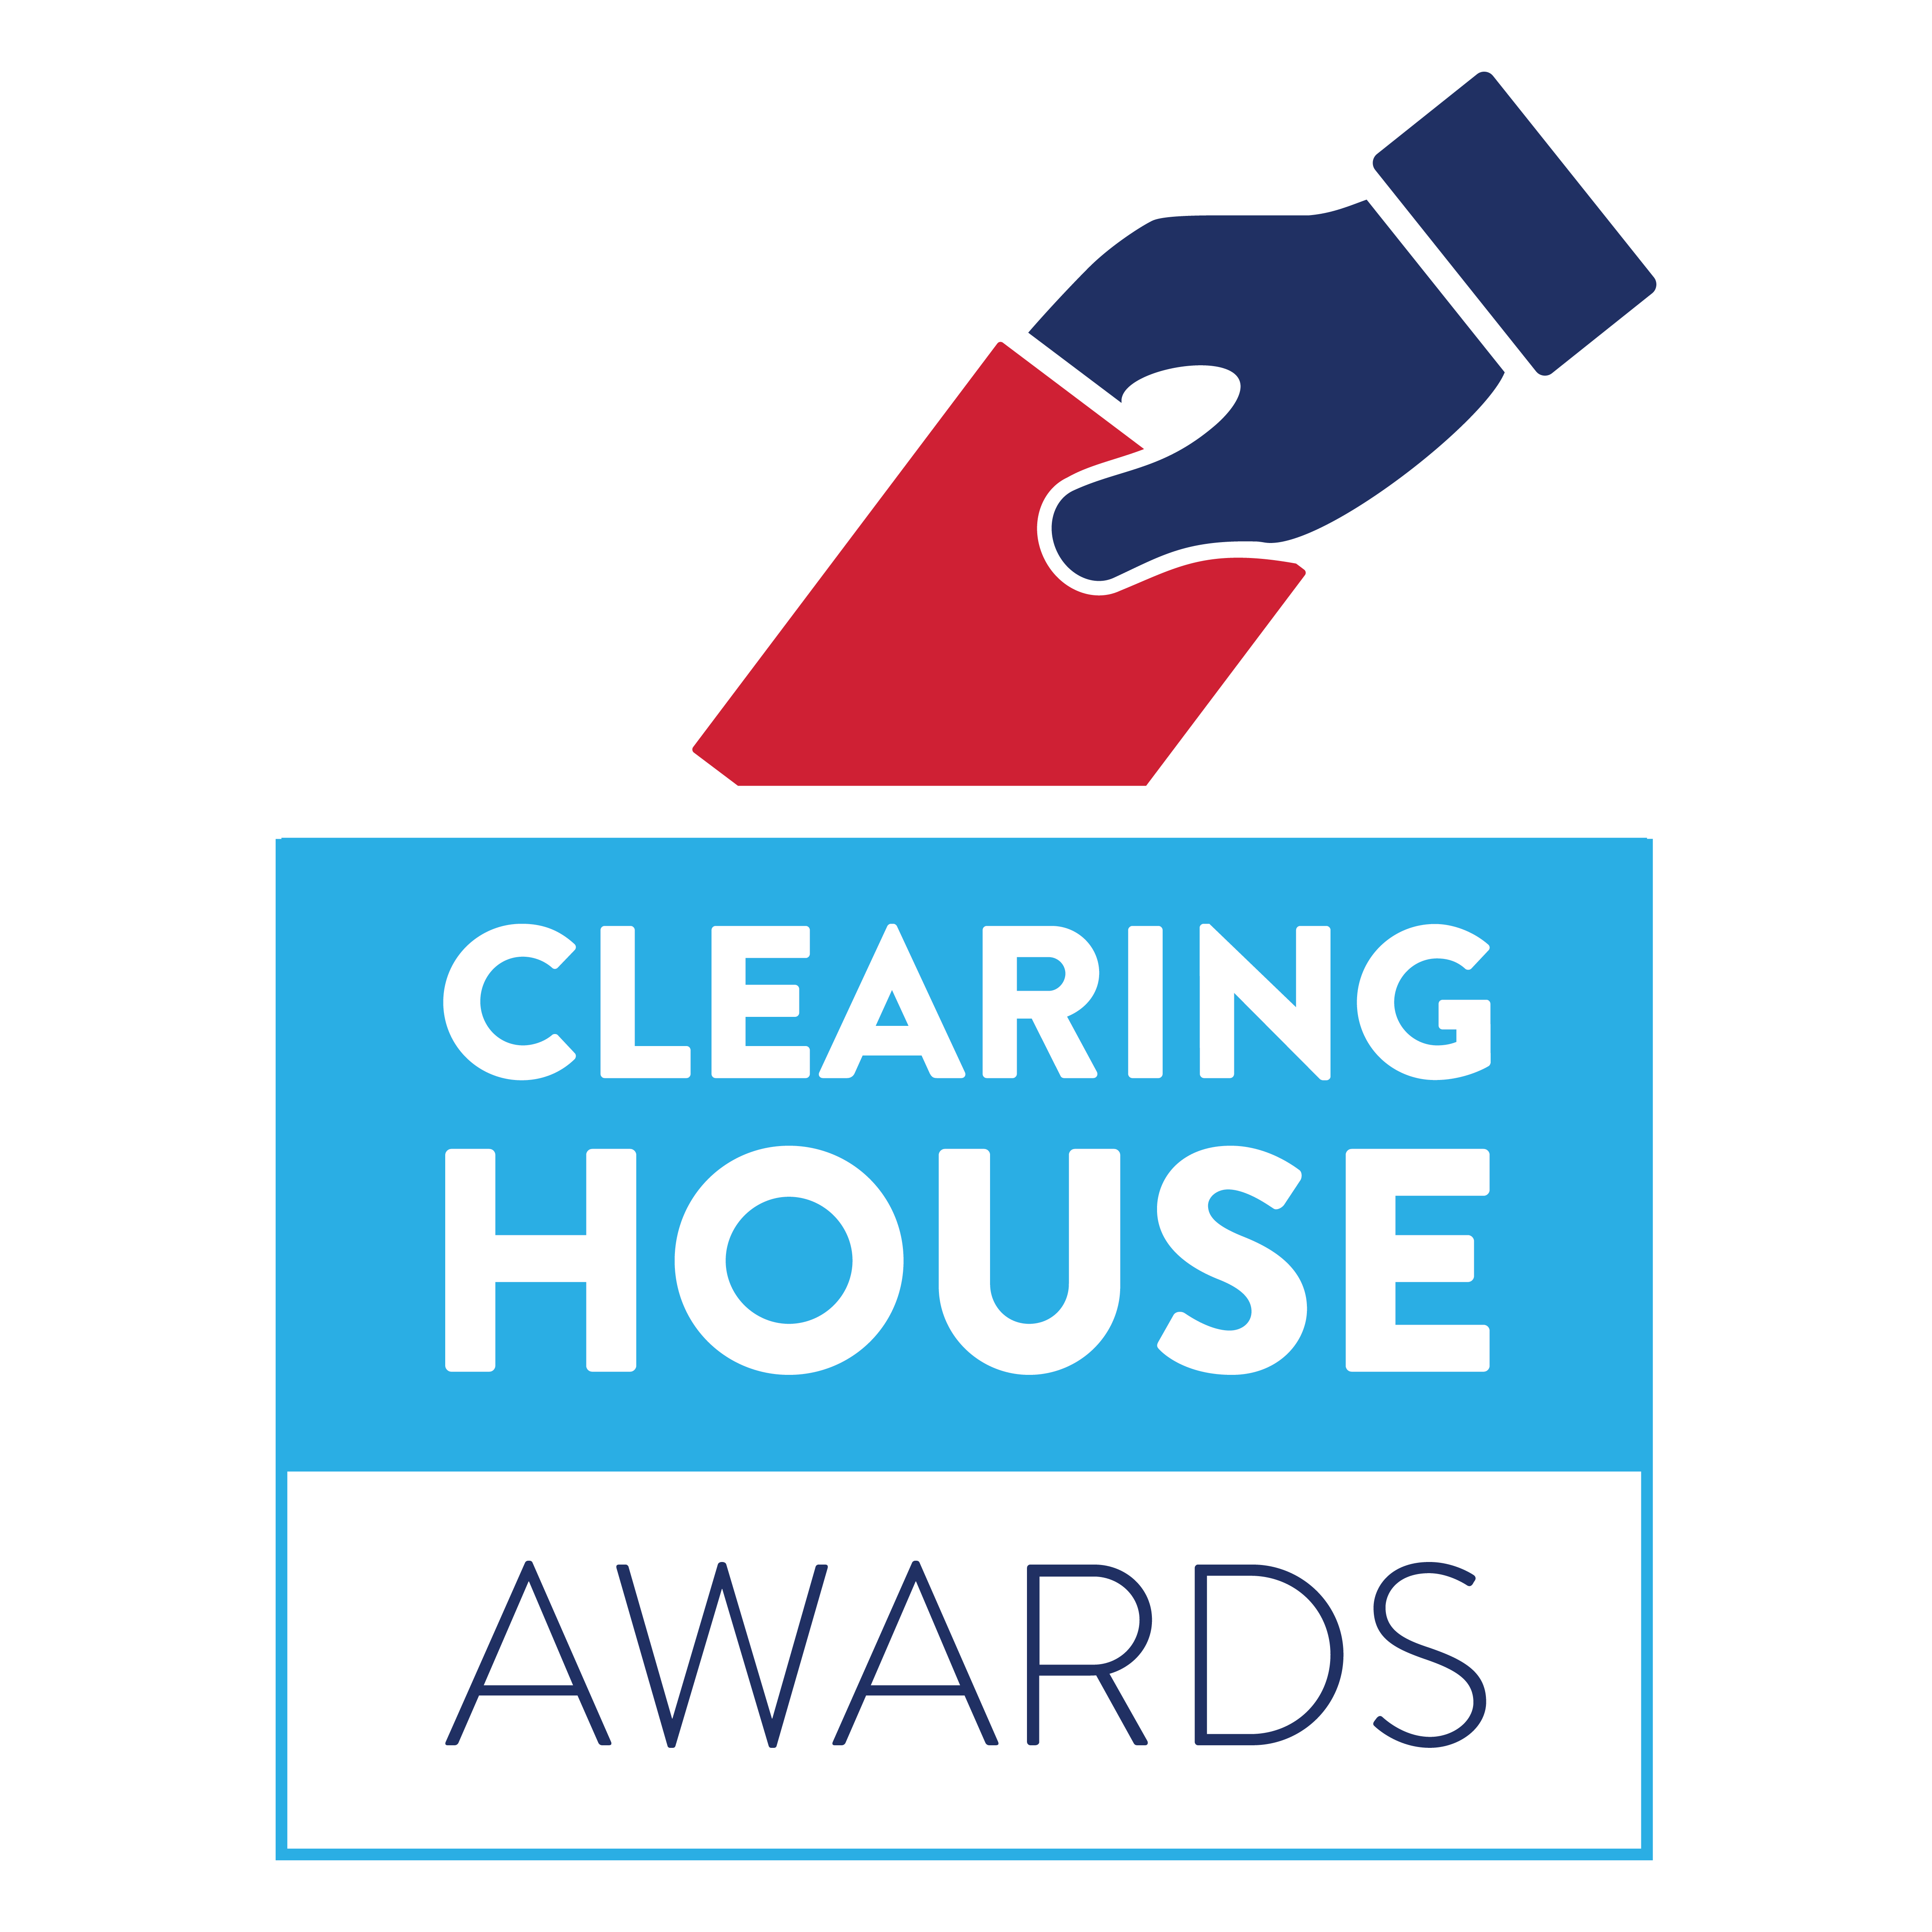 A voter's hand drops a bright red ballot into a box that reads "Clearinghouse Awards." The voter's hand is navy blue while the ballot box is sky blue with a separate grey background behind the word "Awards." 